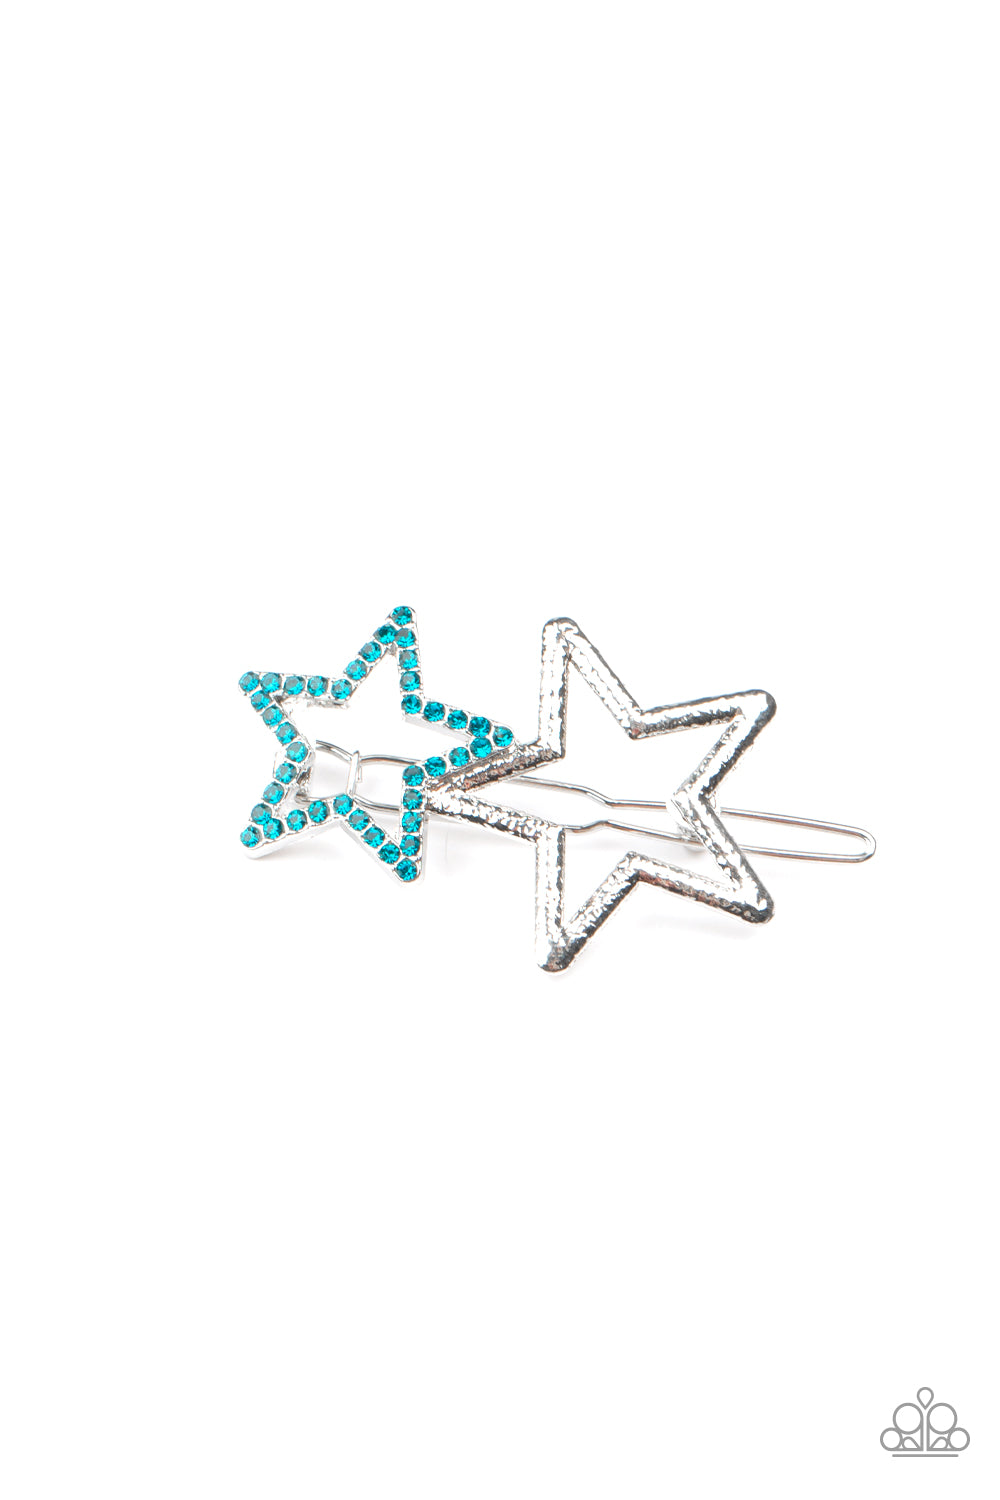 Paparazzi Accessories - Lets Get This Party STAR-ted! - Blue Hair Clip